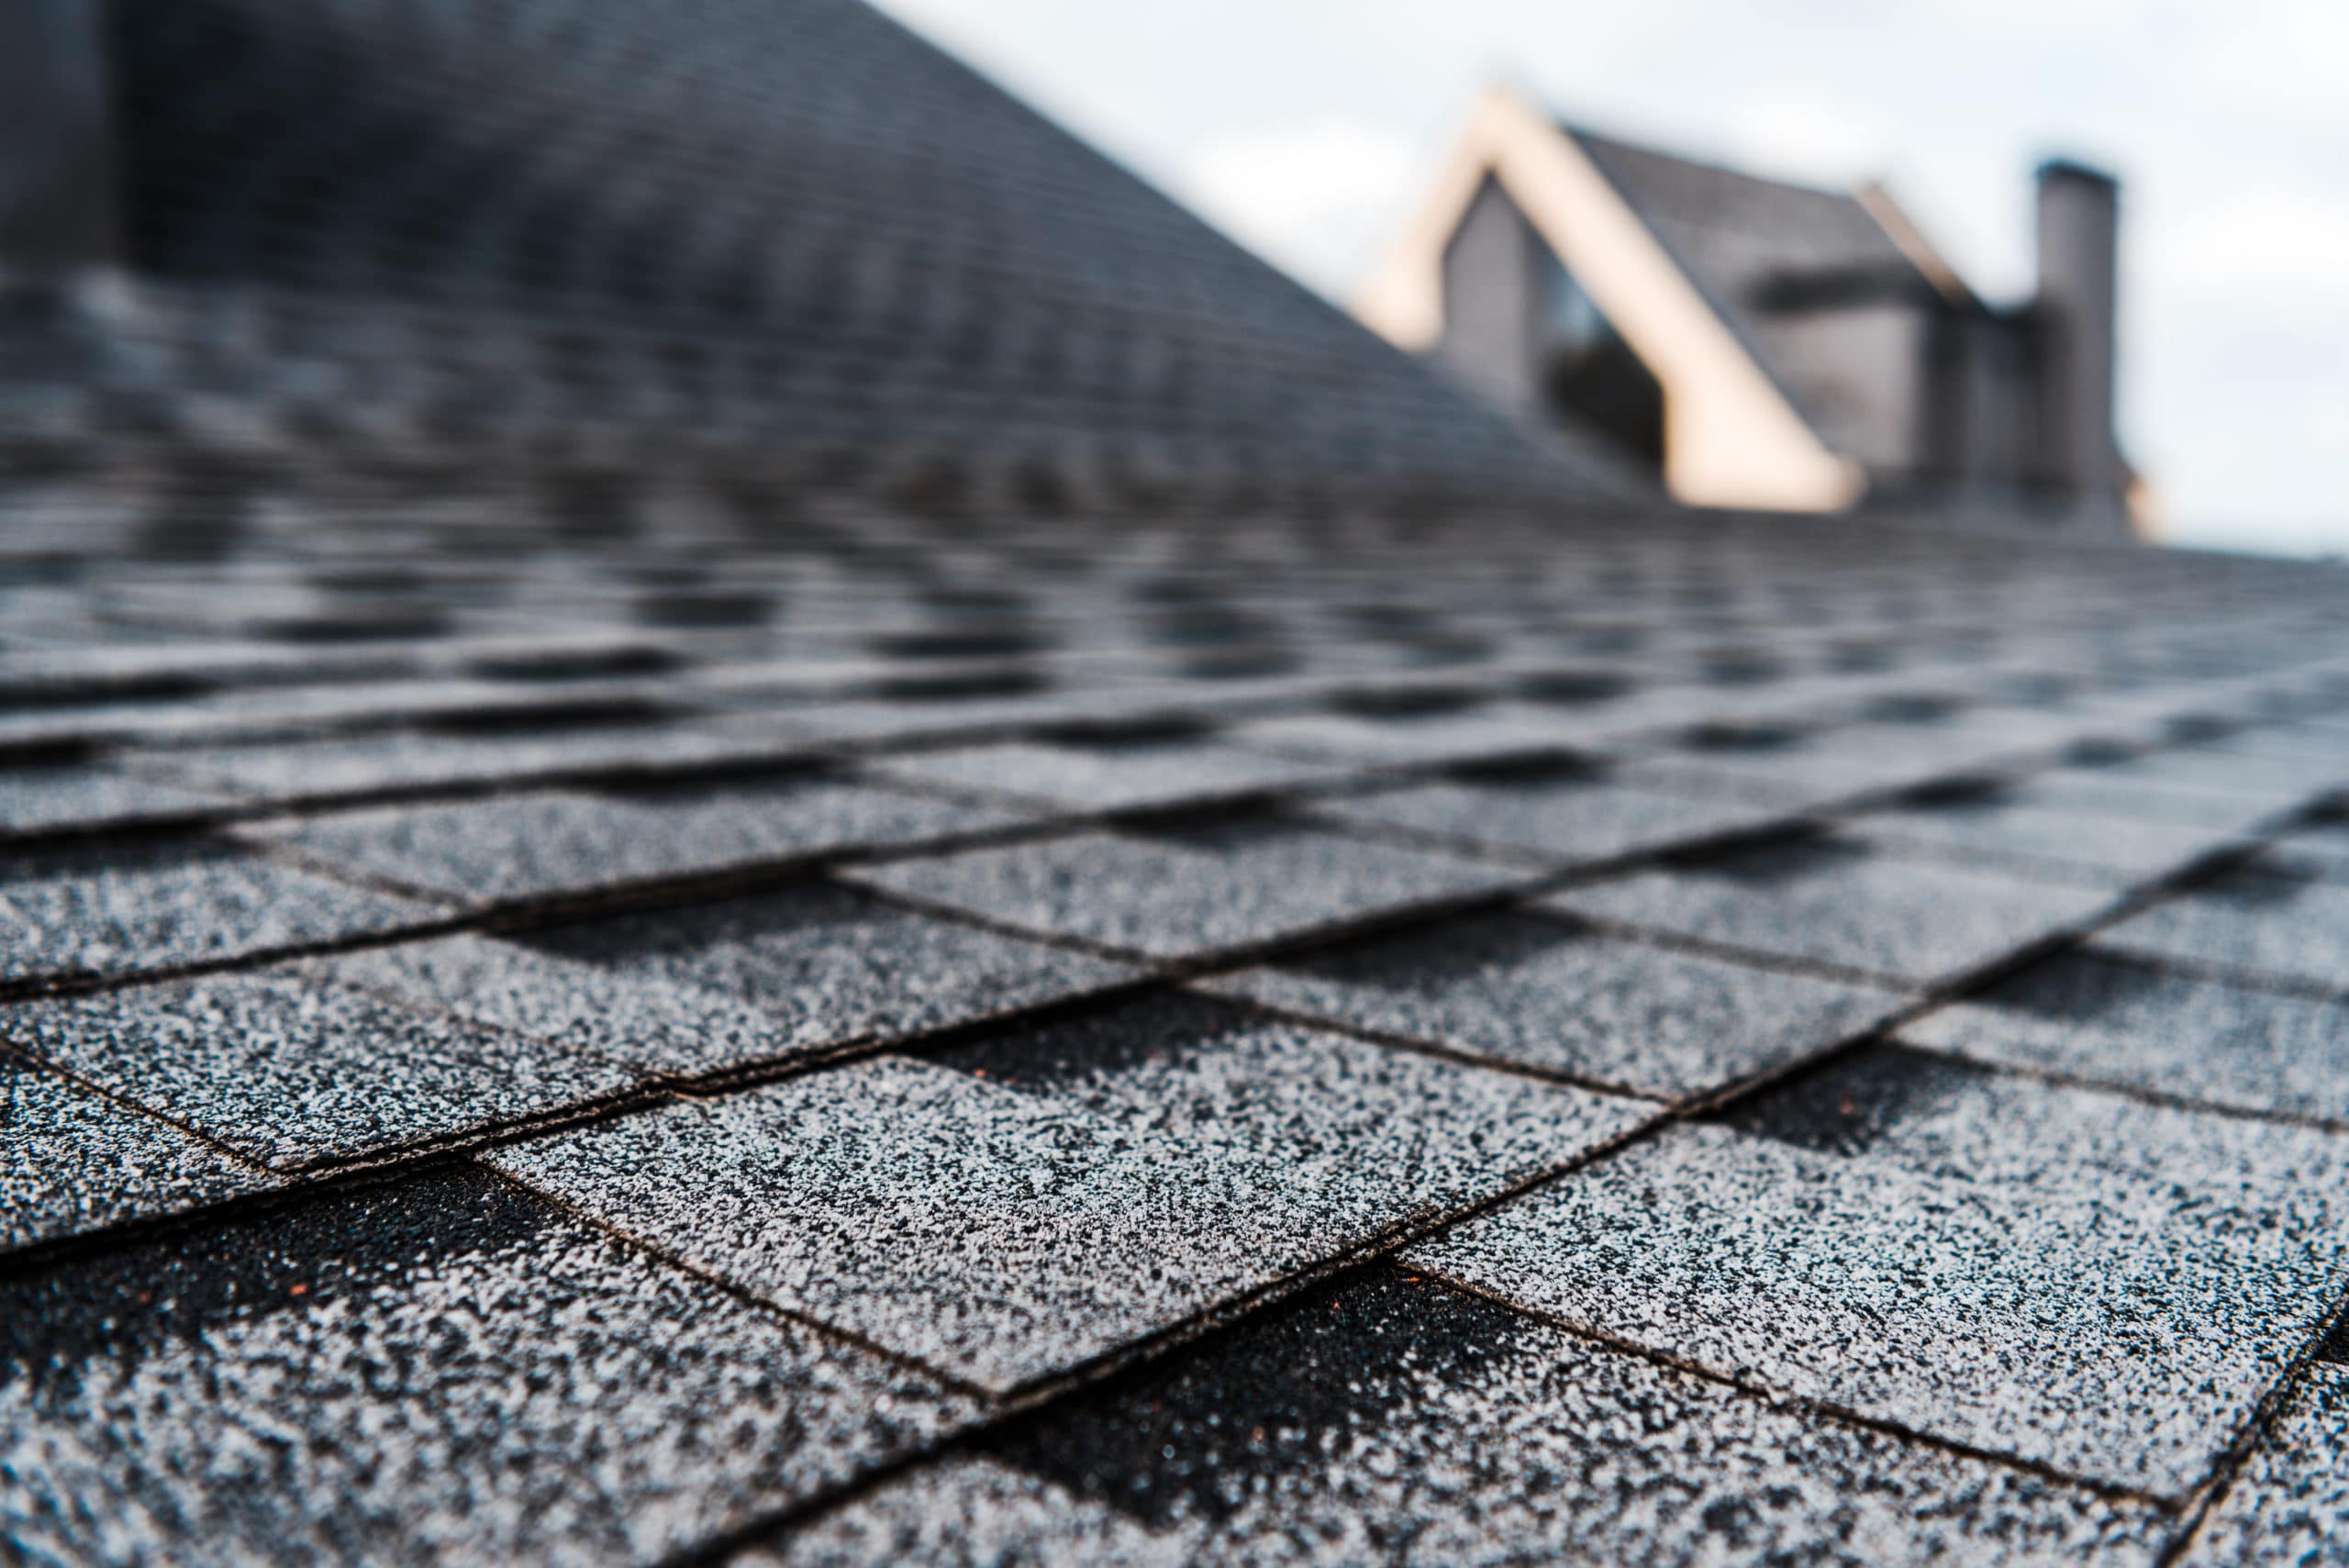 Are Your Shingles Losing Granules? You May Need Roof Repair